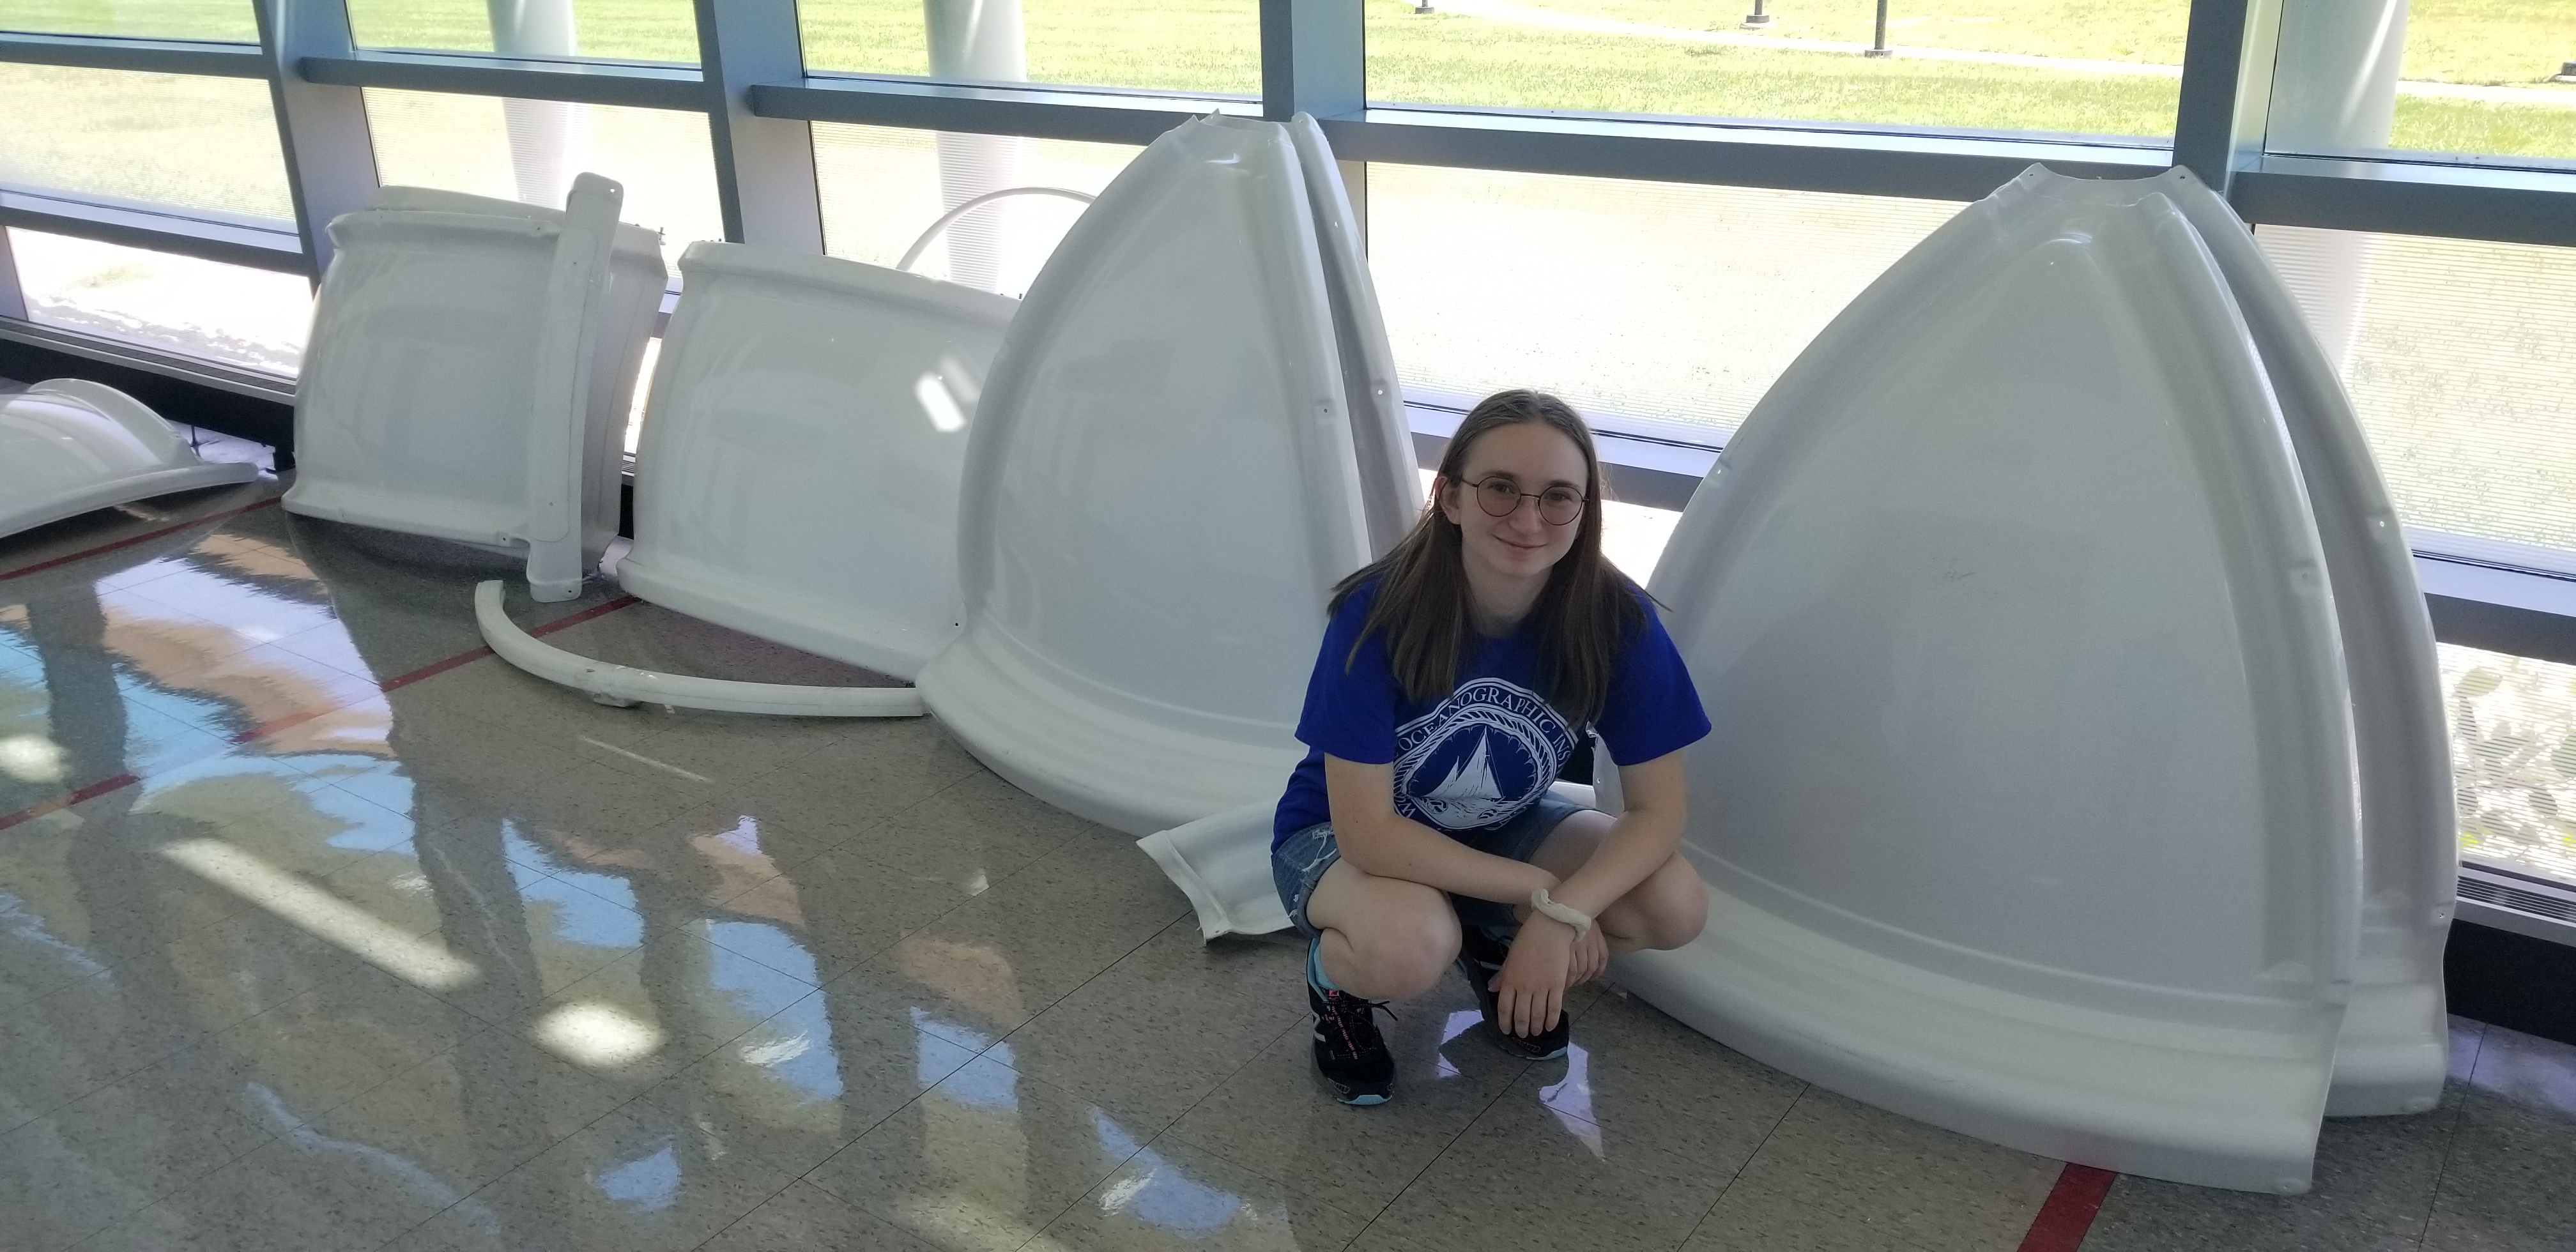 ALPHA Summer Intern Julianne Reese posing with observatory parts to be assembled